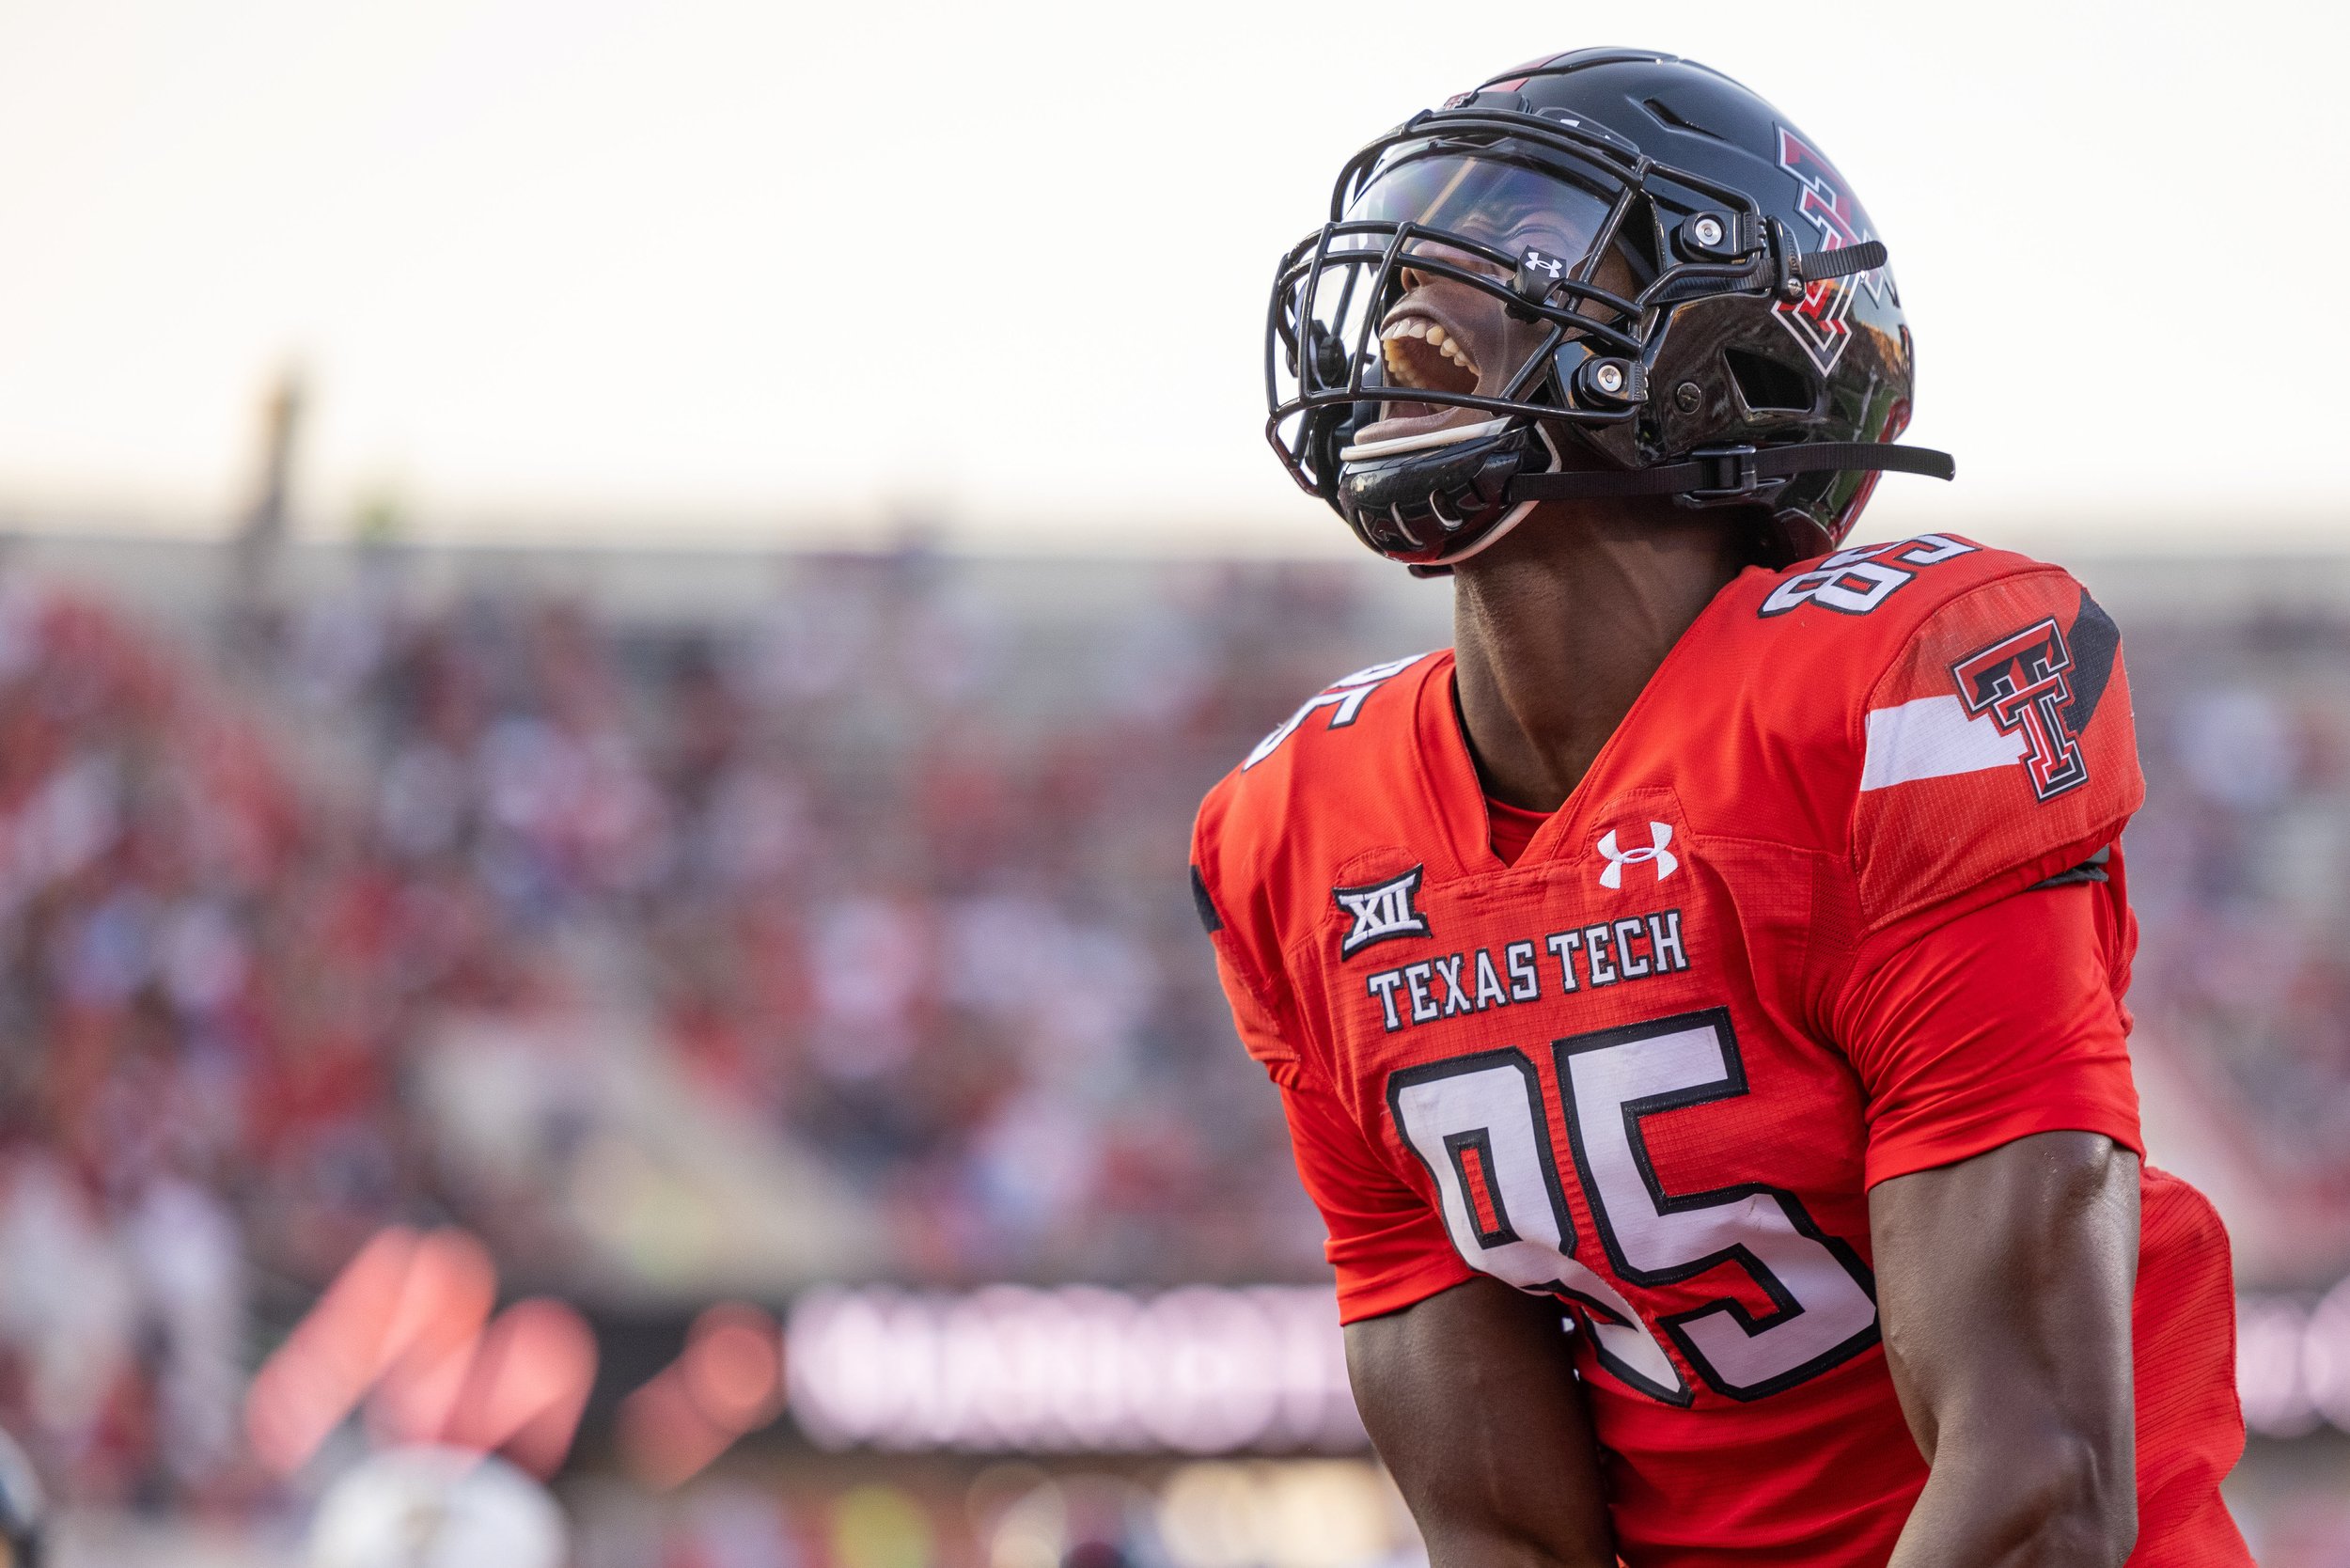  Texas Tech's Trey Cleveland (85) celebrates a touchdown during the first half of the team’s NCAA college football game against Florida International University on Saturday, Sept. 18, 2021 in Lubbock, Texas. 